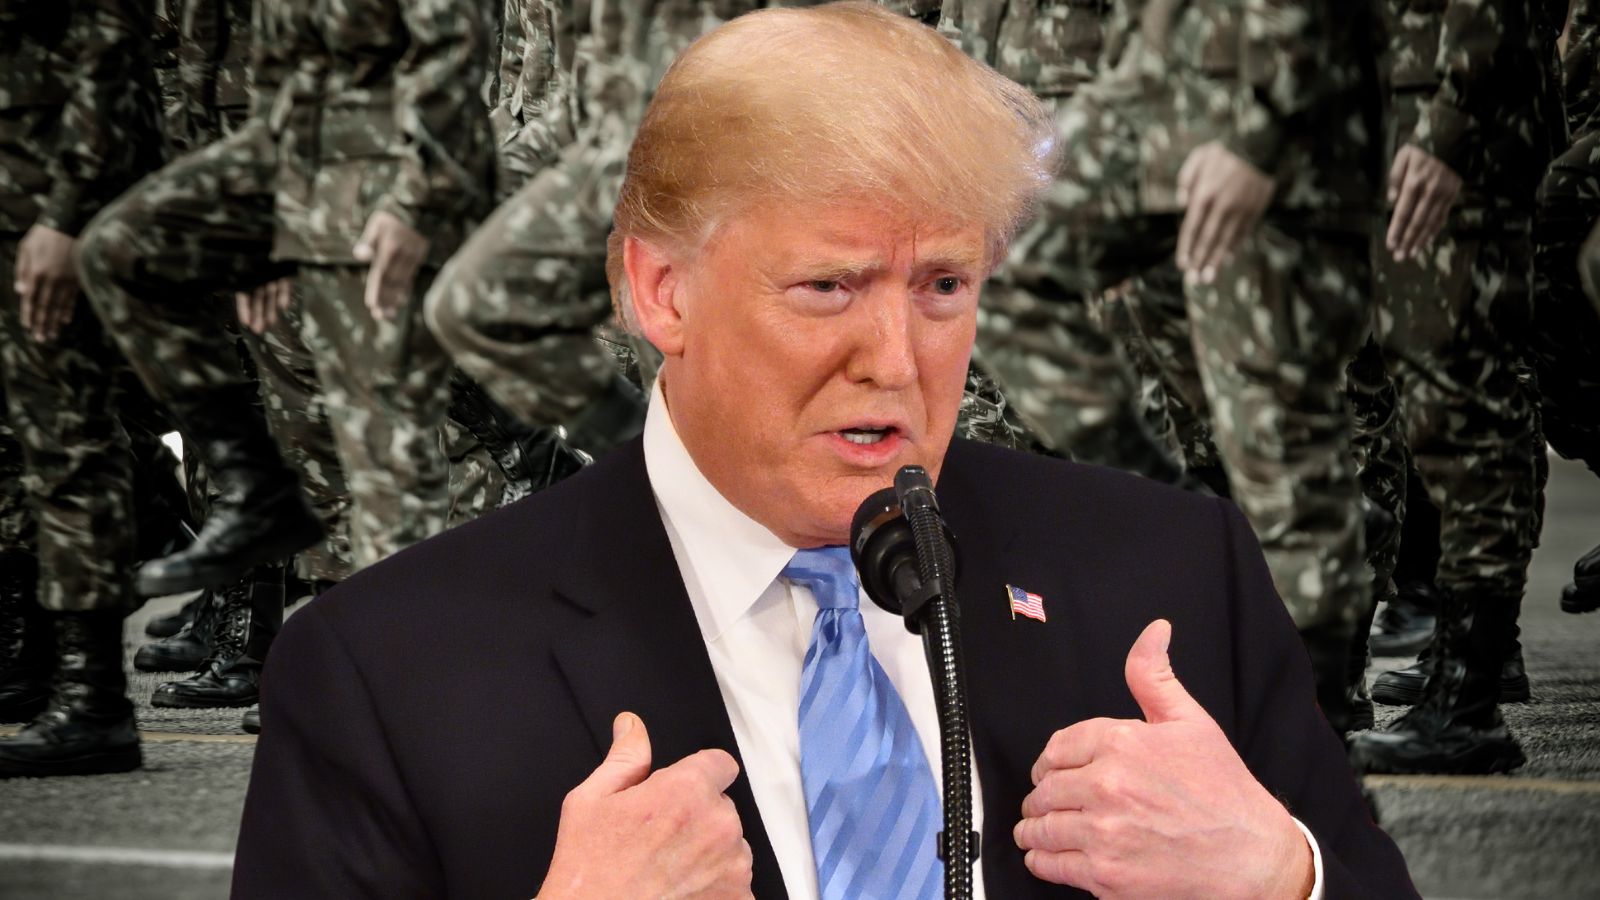 “Pathological Liar” Trump Claims Credit for Obama’s Veterans Choice Act